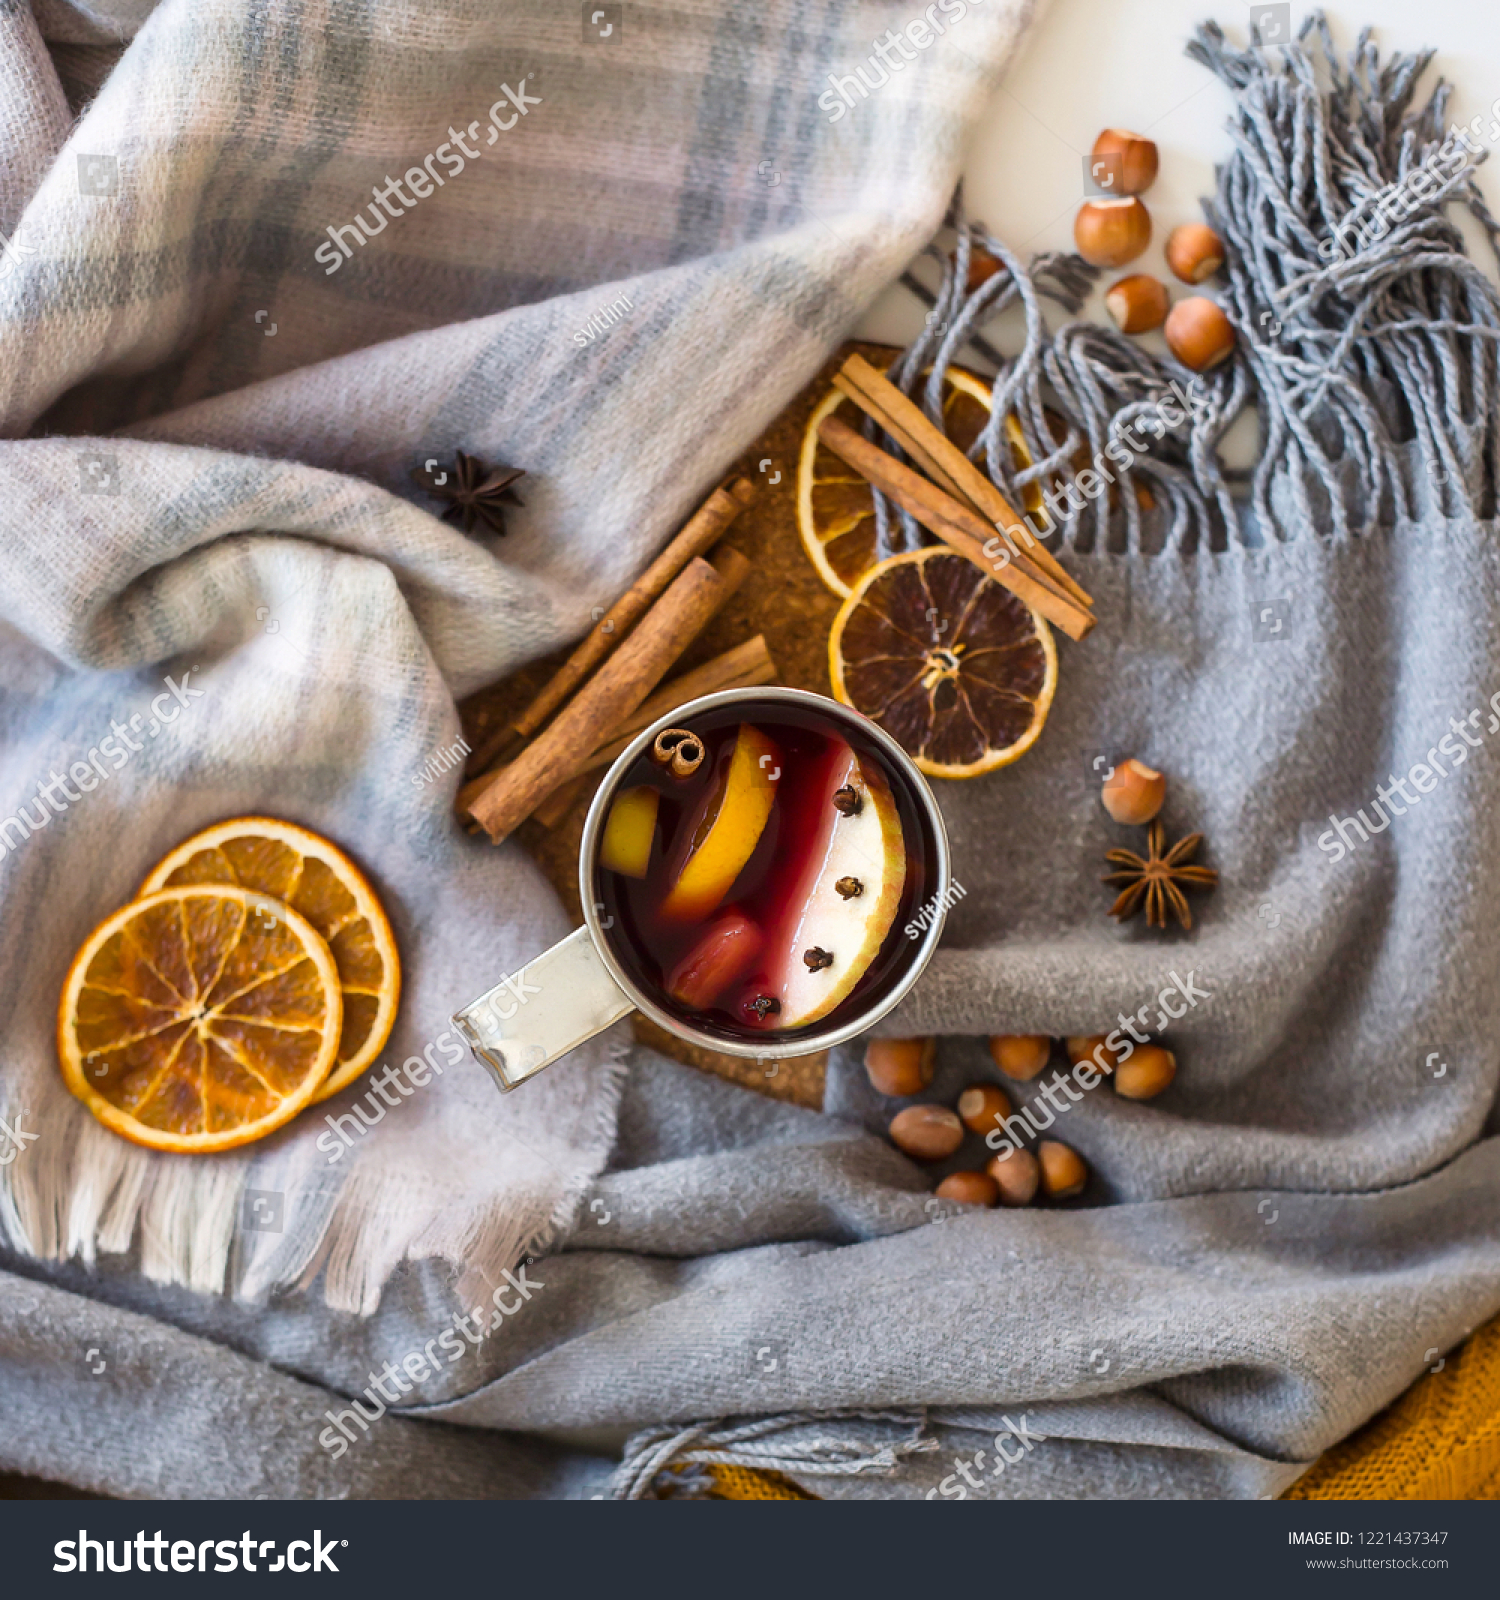 Mulled wine with apple, orange, clove, cinnamon and anise in a metal mug among winter plaids, scarves and sweaters. Hot drink on the eve Christmas eve #1221437347